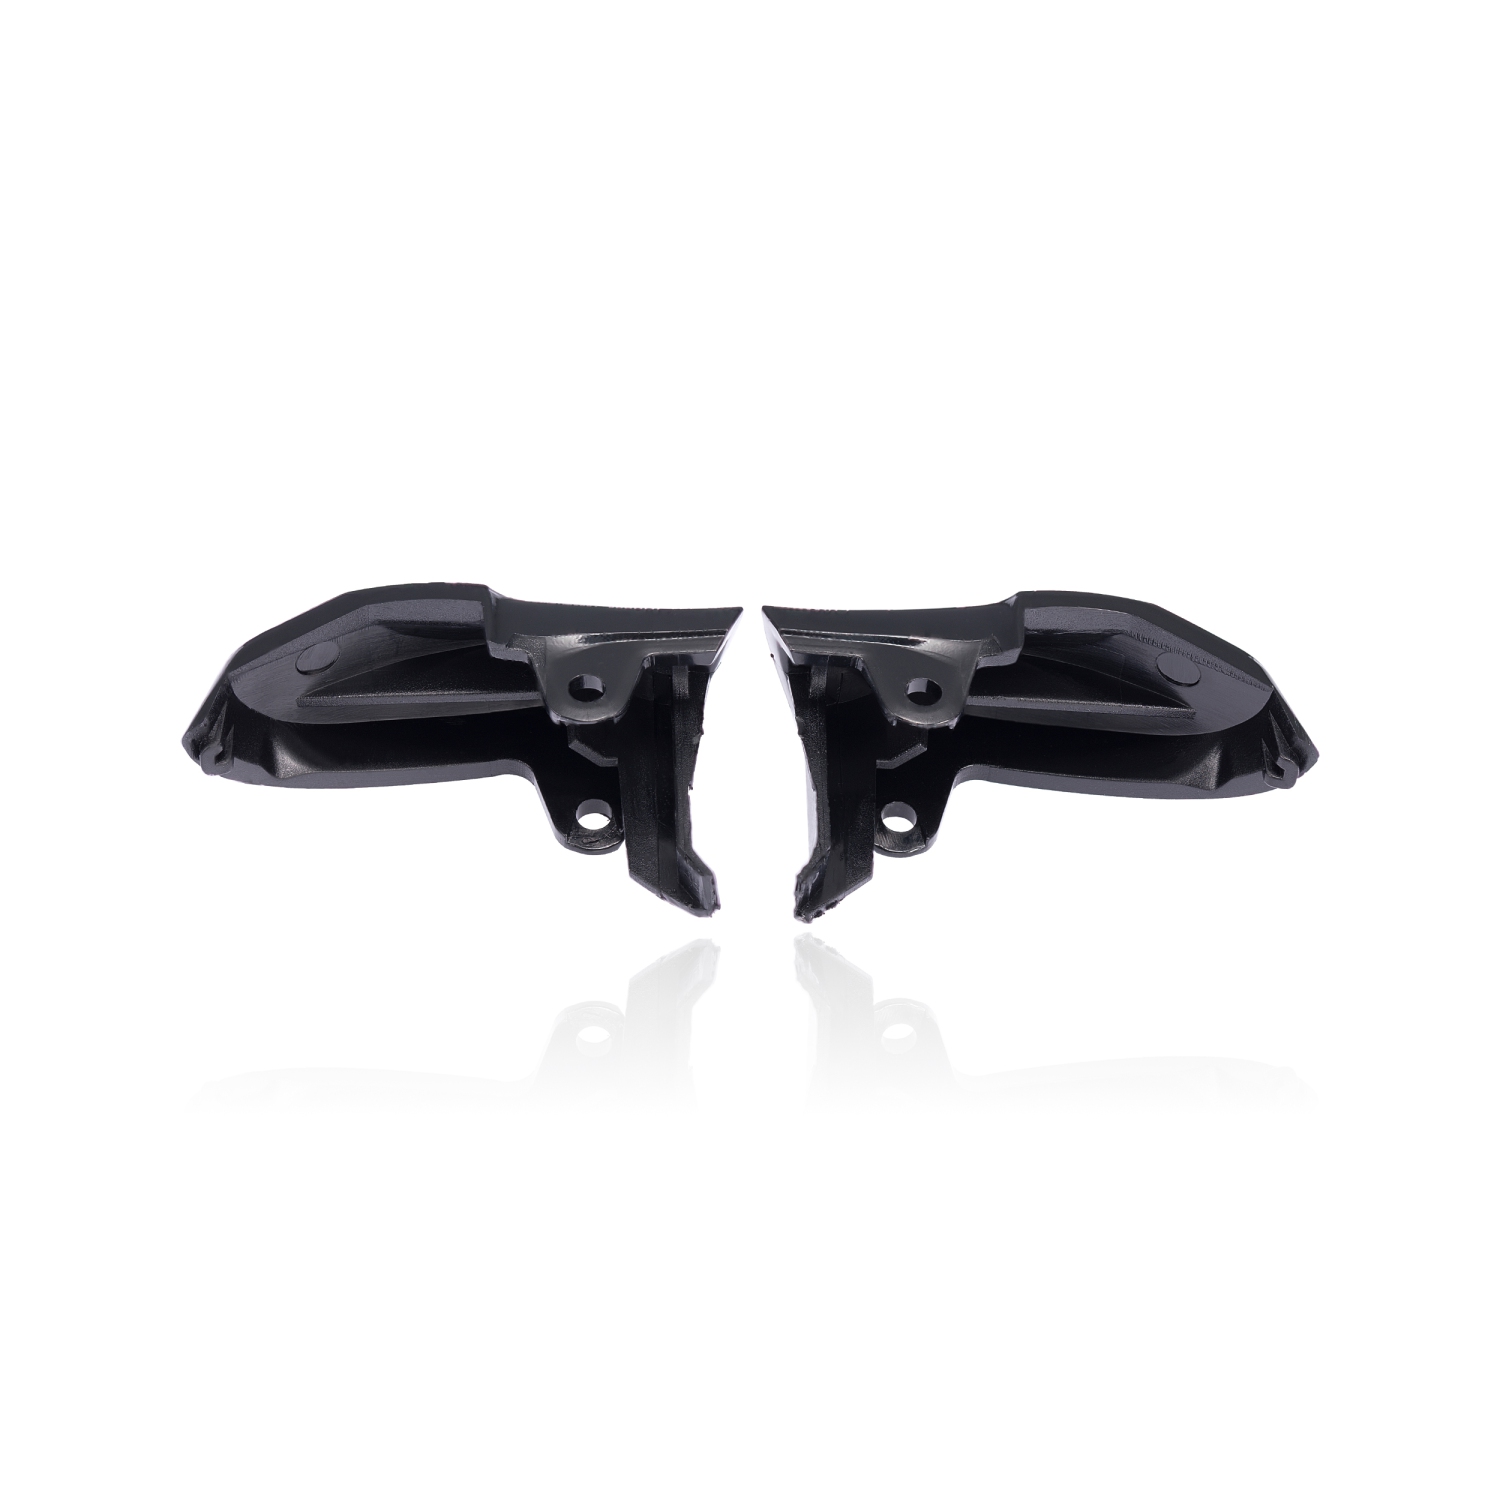 Replacement LB RB Trigger Bumper Buttons Compatible With Xbox One Controller (1537)